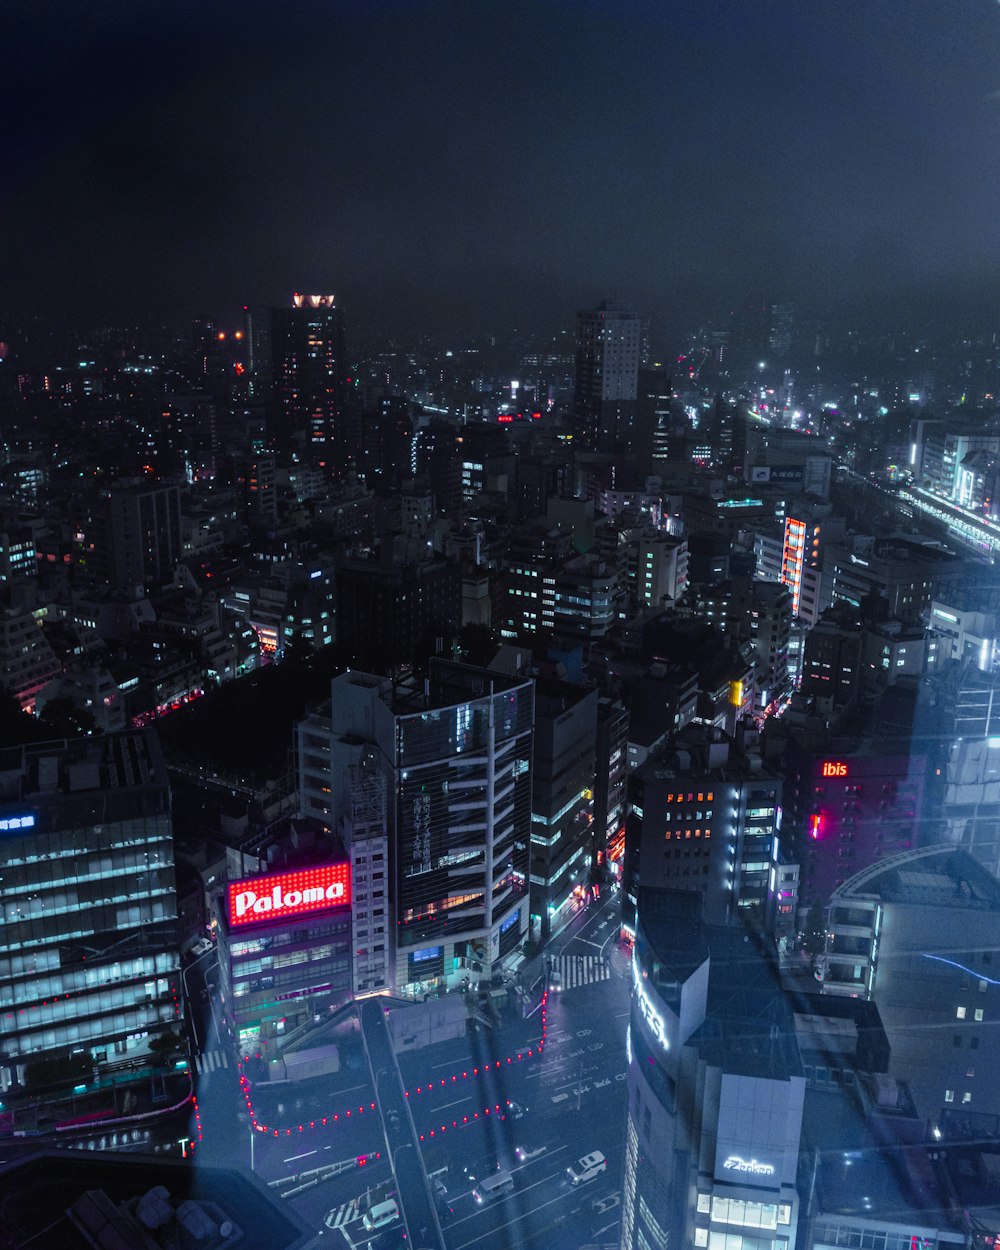 a view of a city at night from a tall building